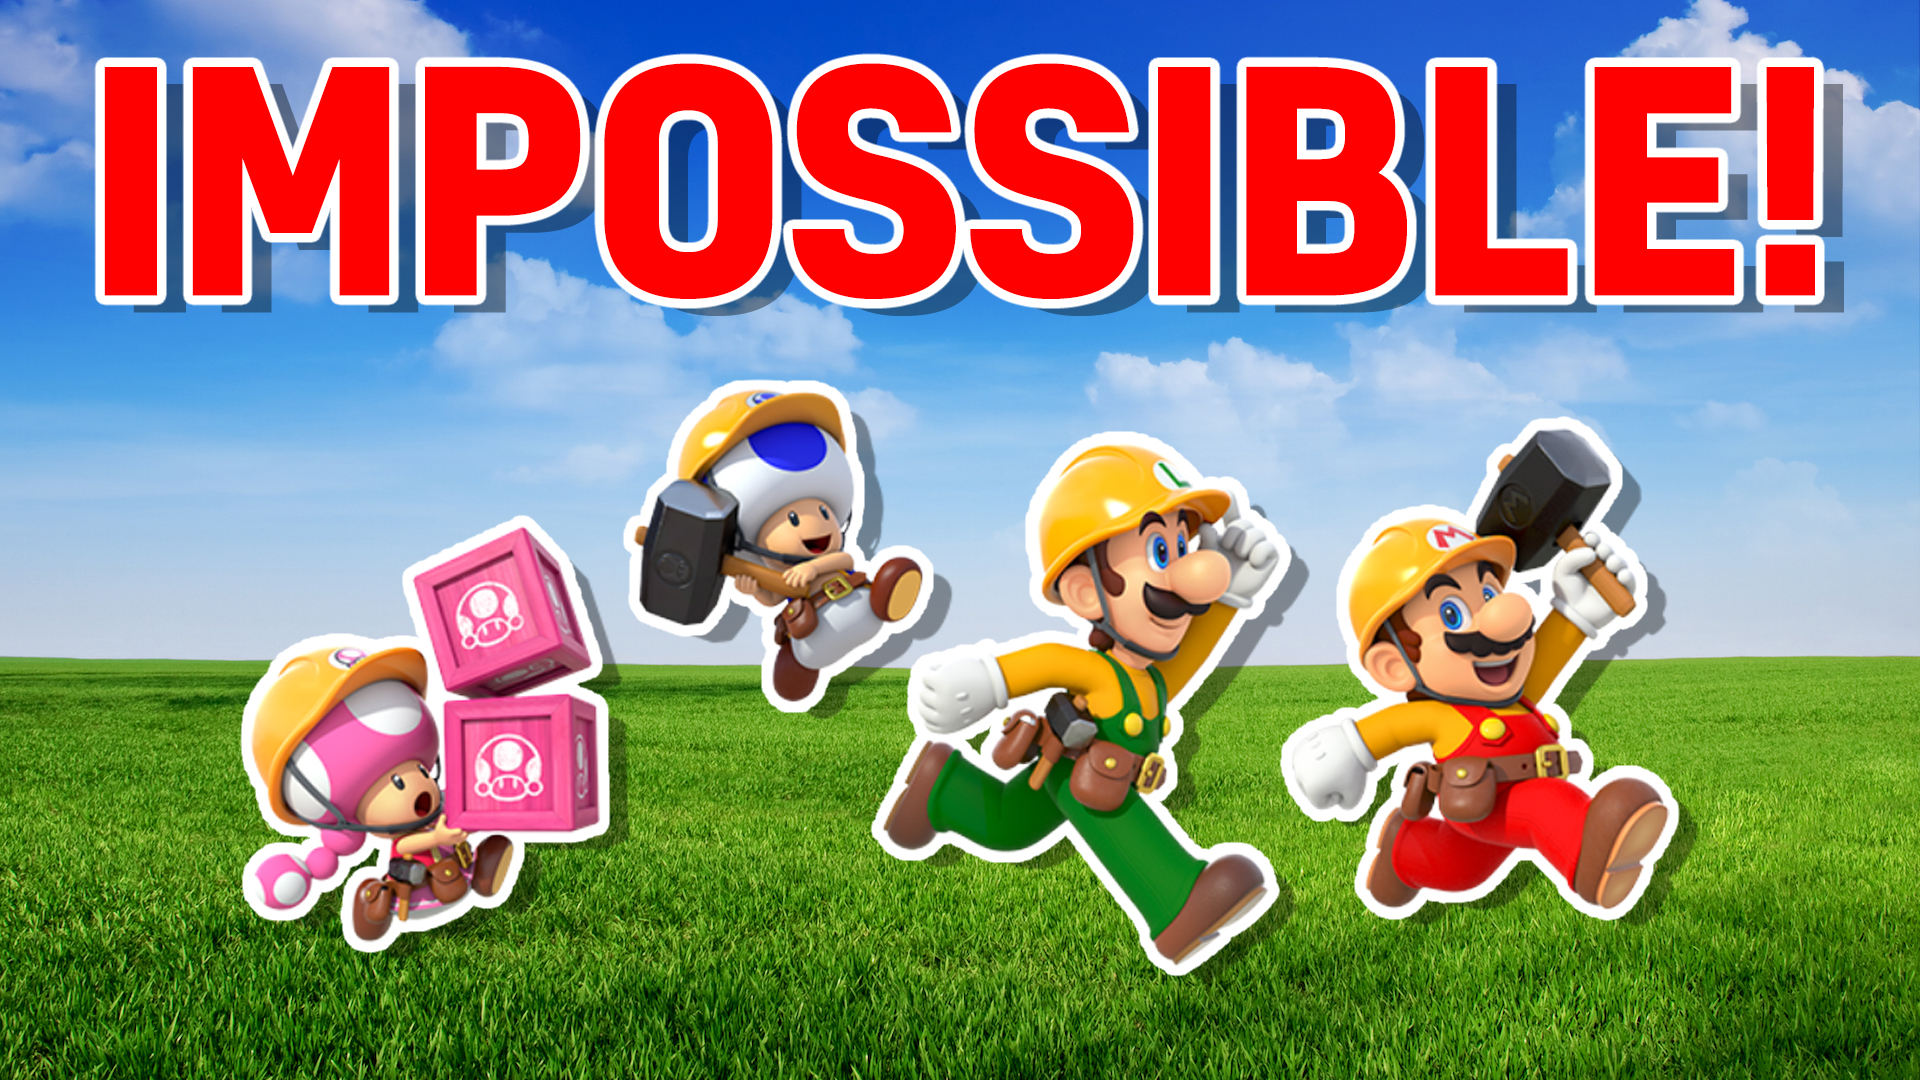 Your Super Mario Maker 2 Style: IMPOSSIBLE!